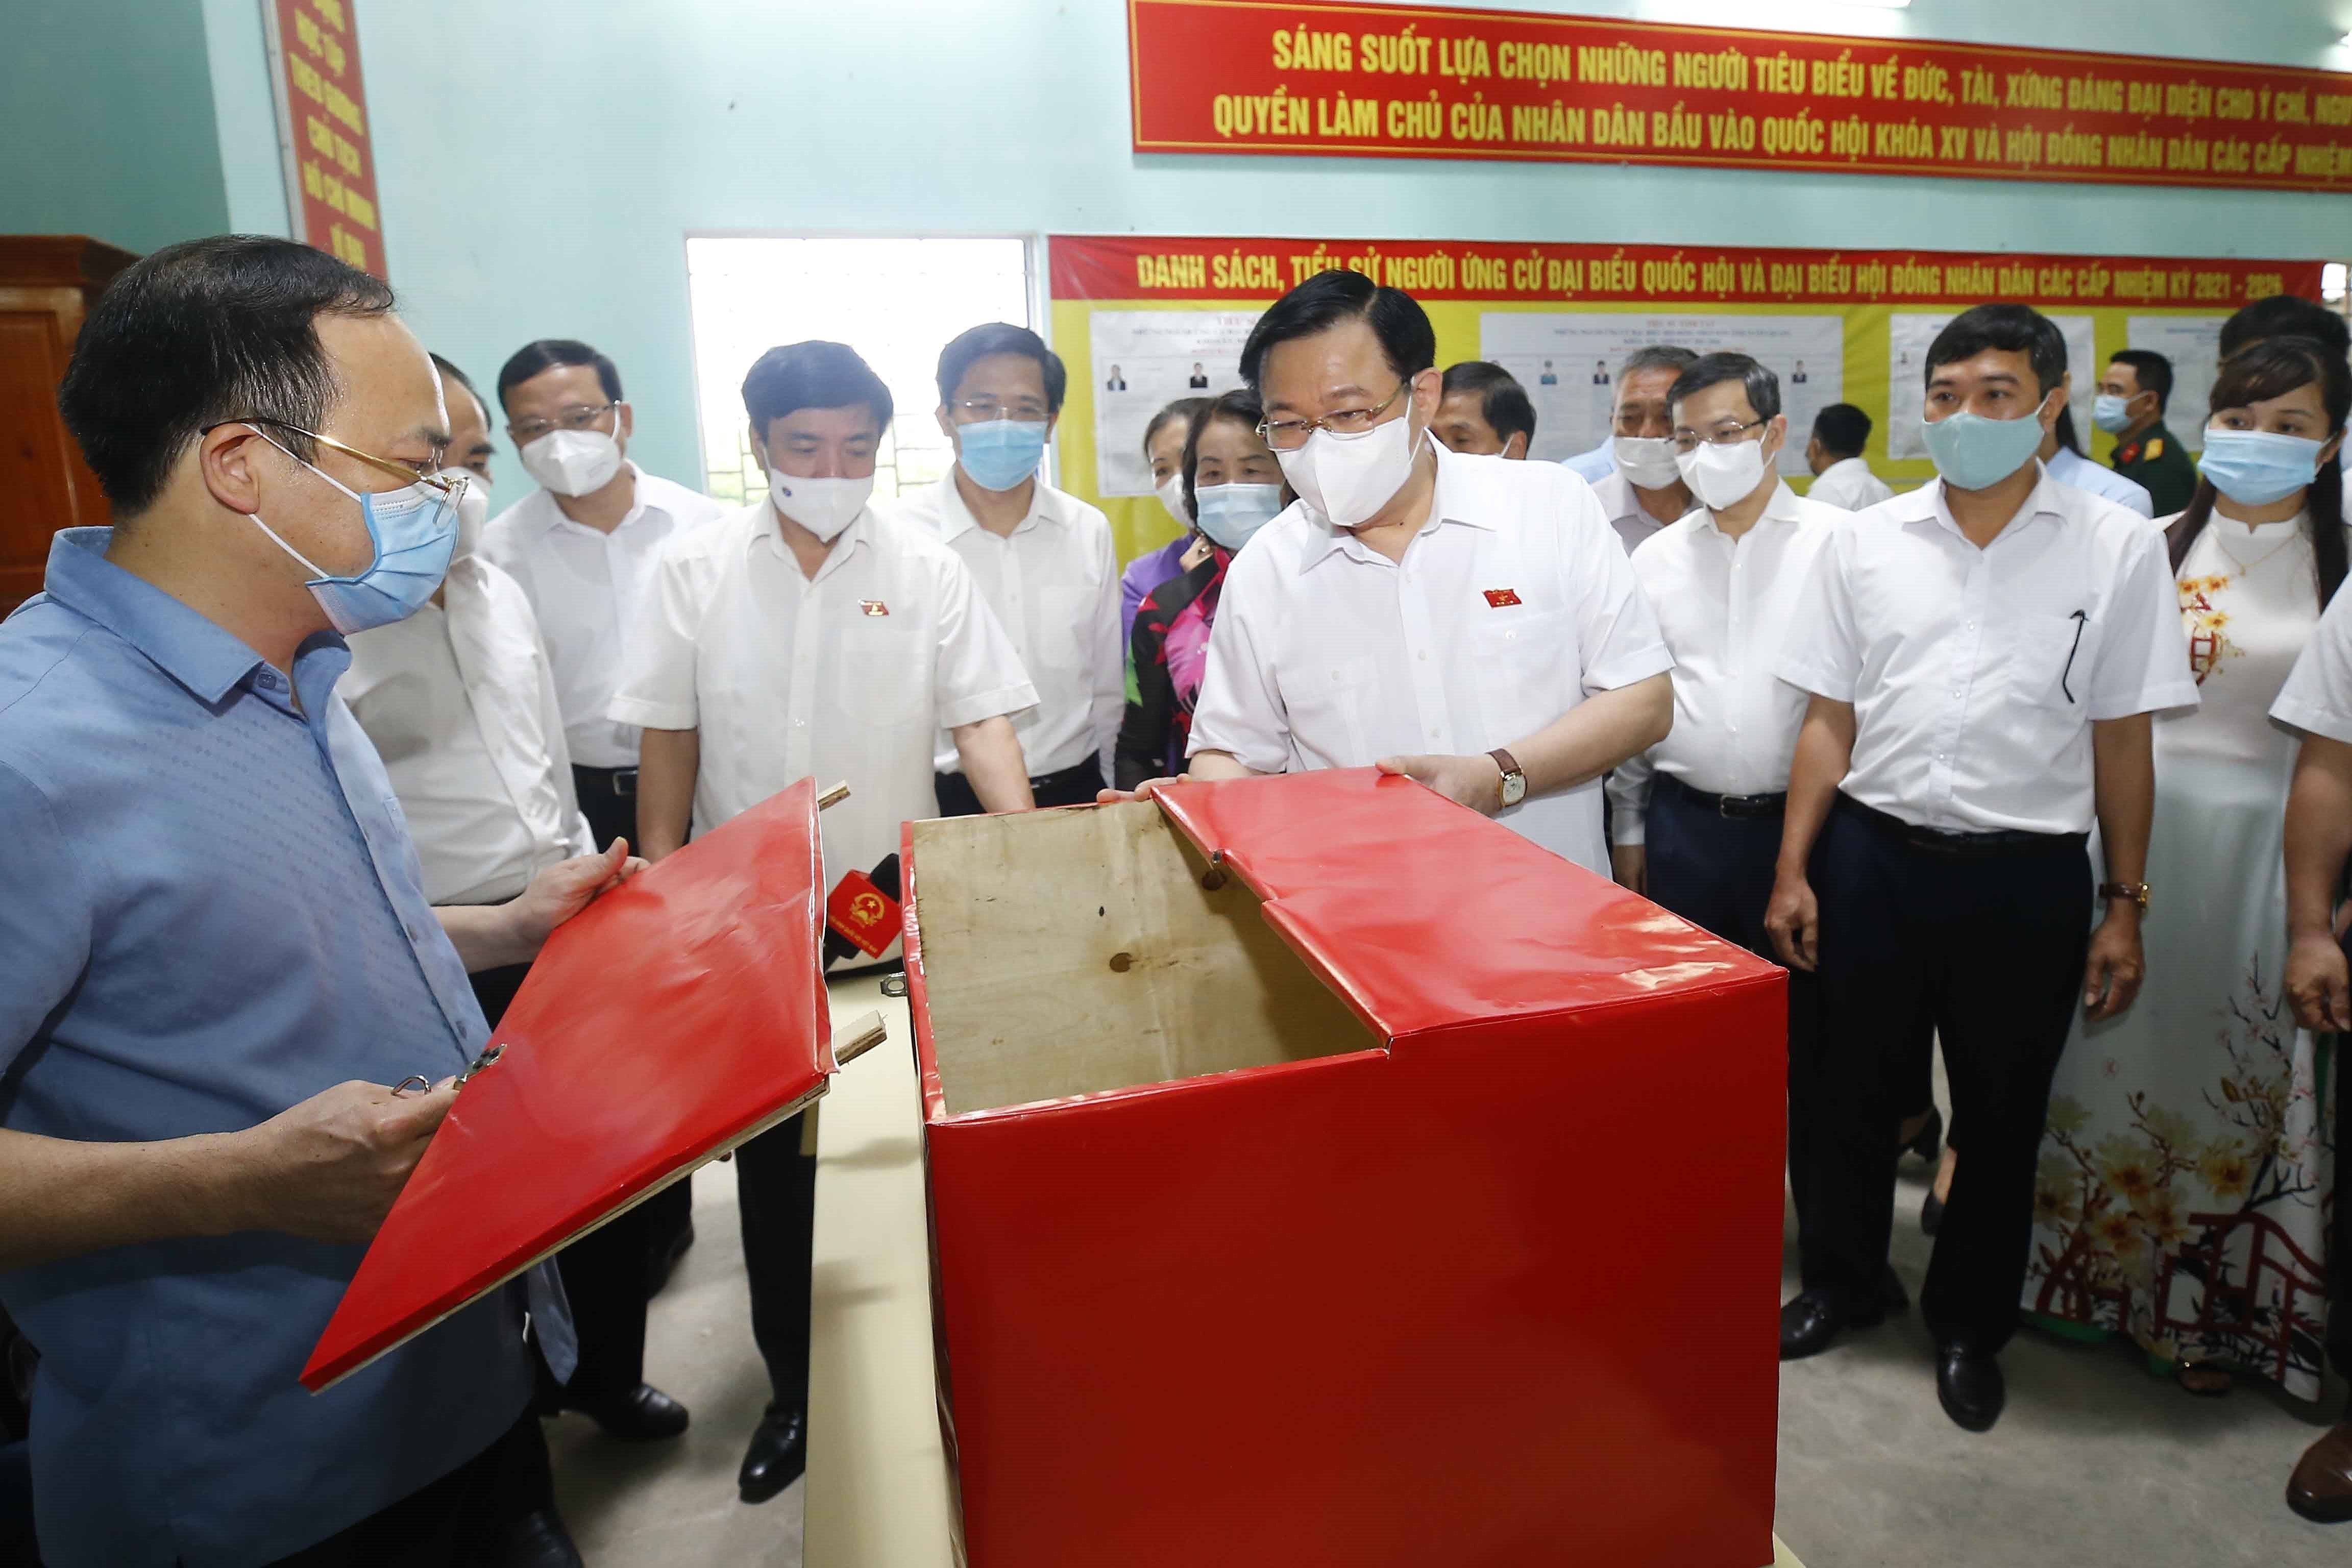 Legislative leader inspects election preparations in Tuyen Quang province hinh anh 2